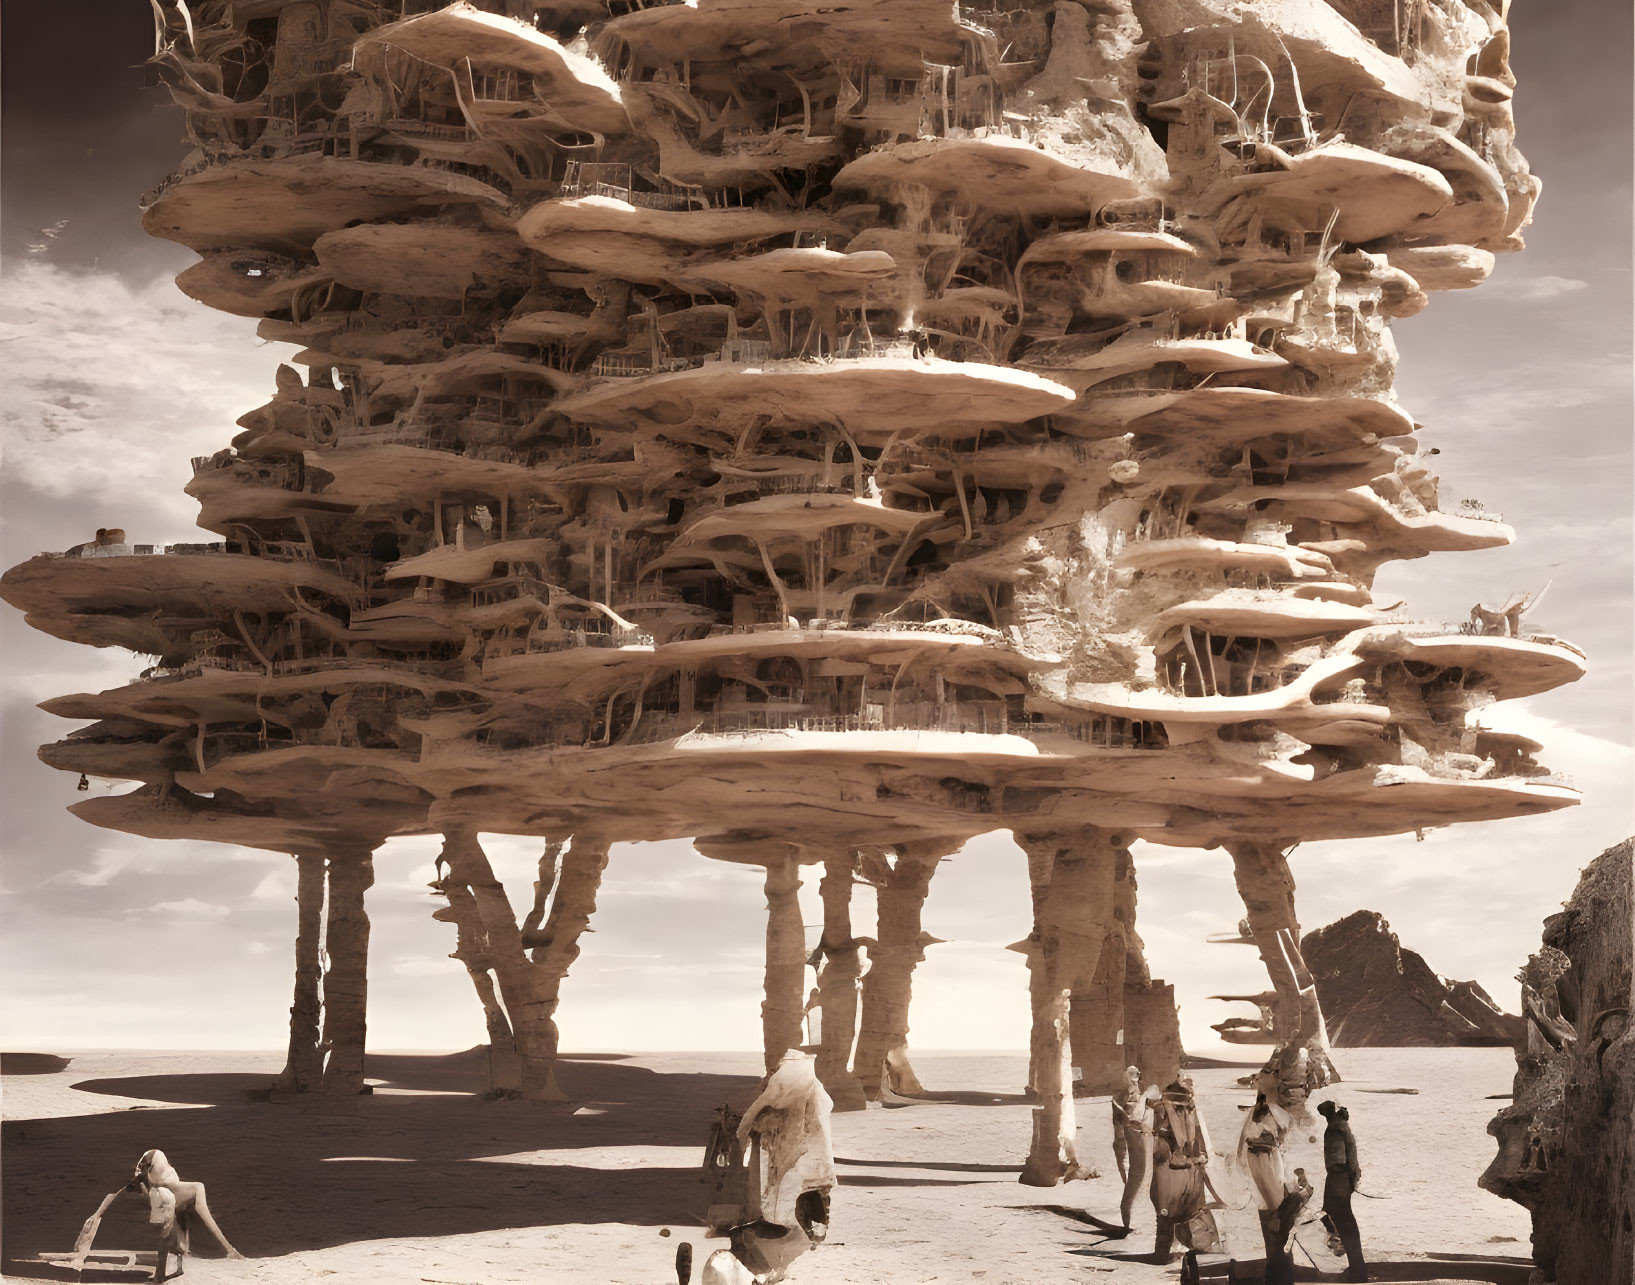 Surreal organic structure in desert with robed figures